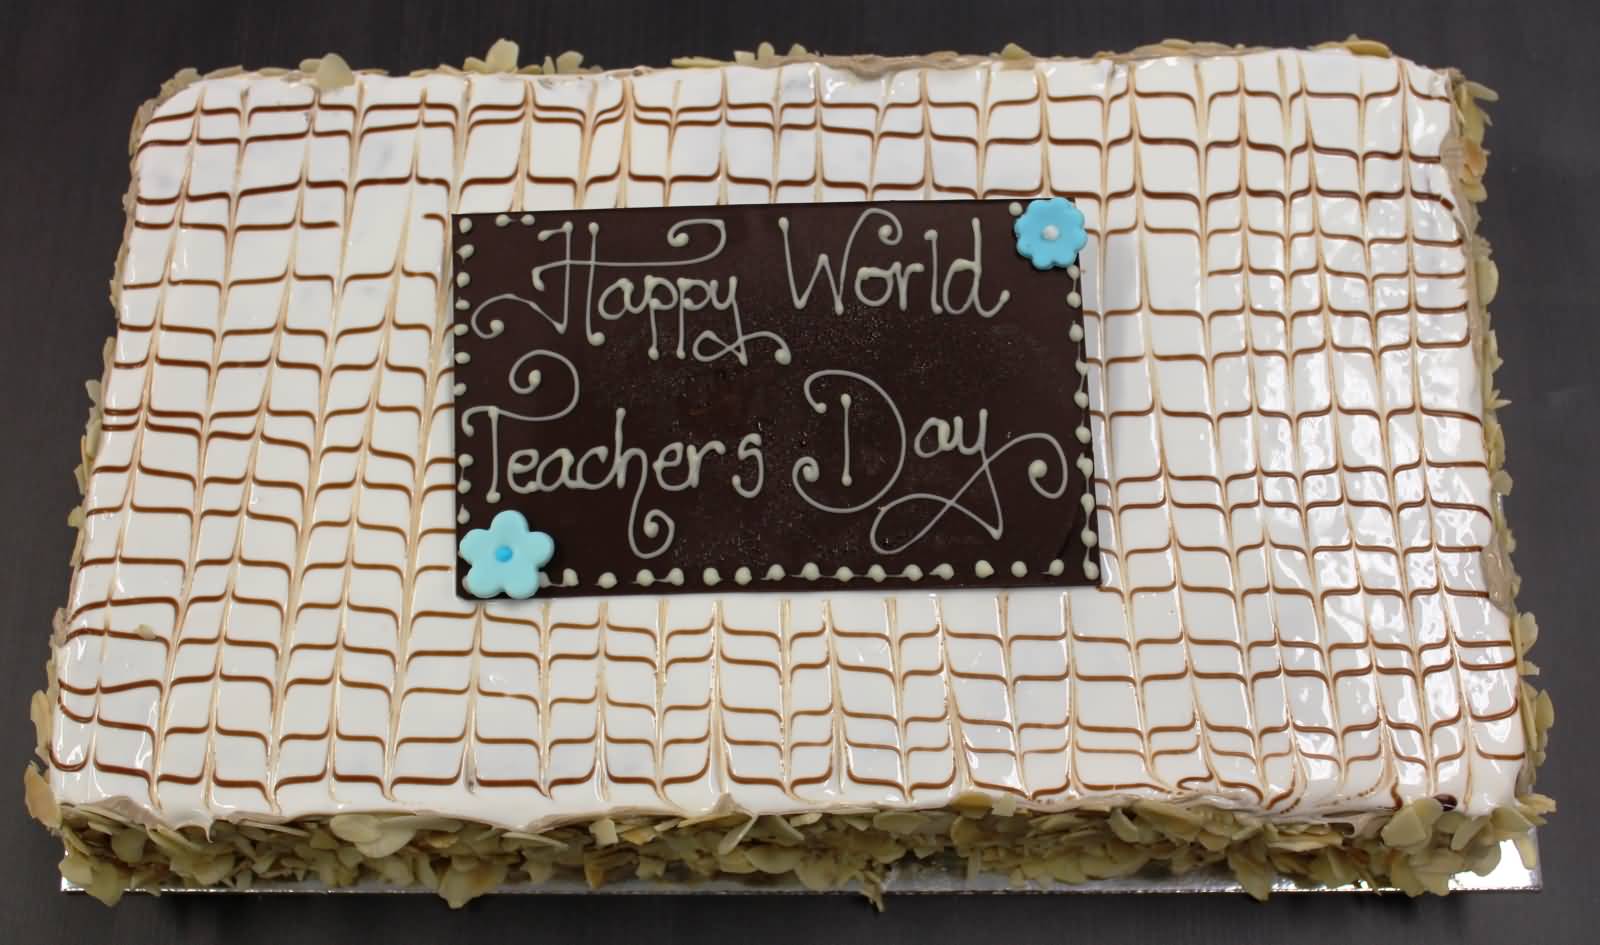 Happy World Teachers Day Cake Picture